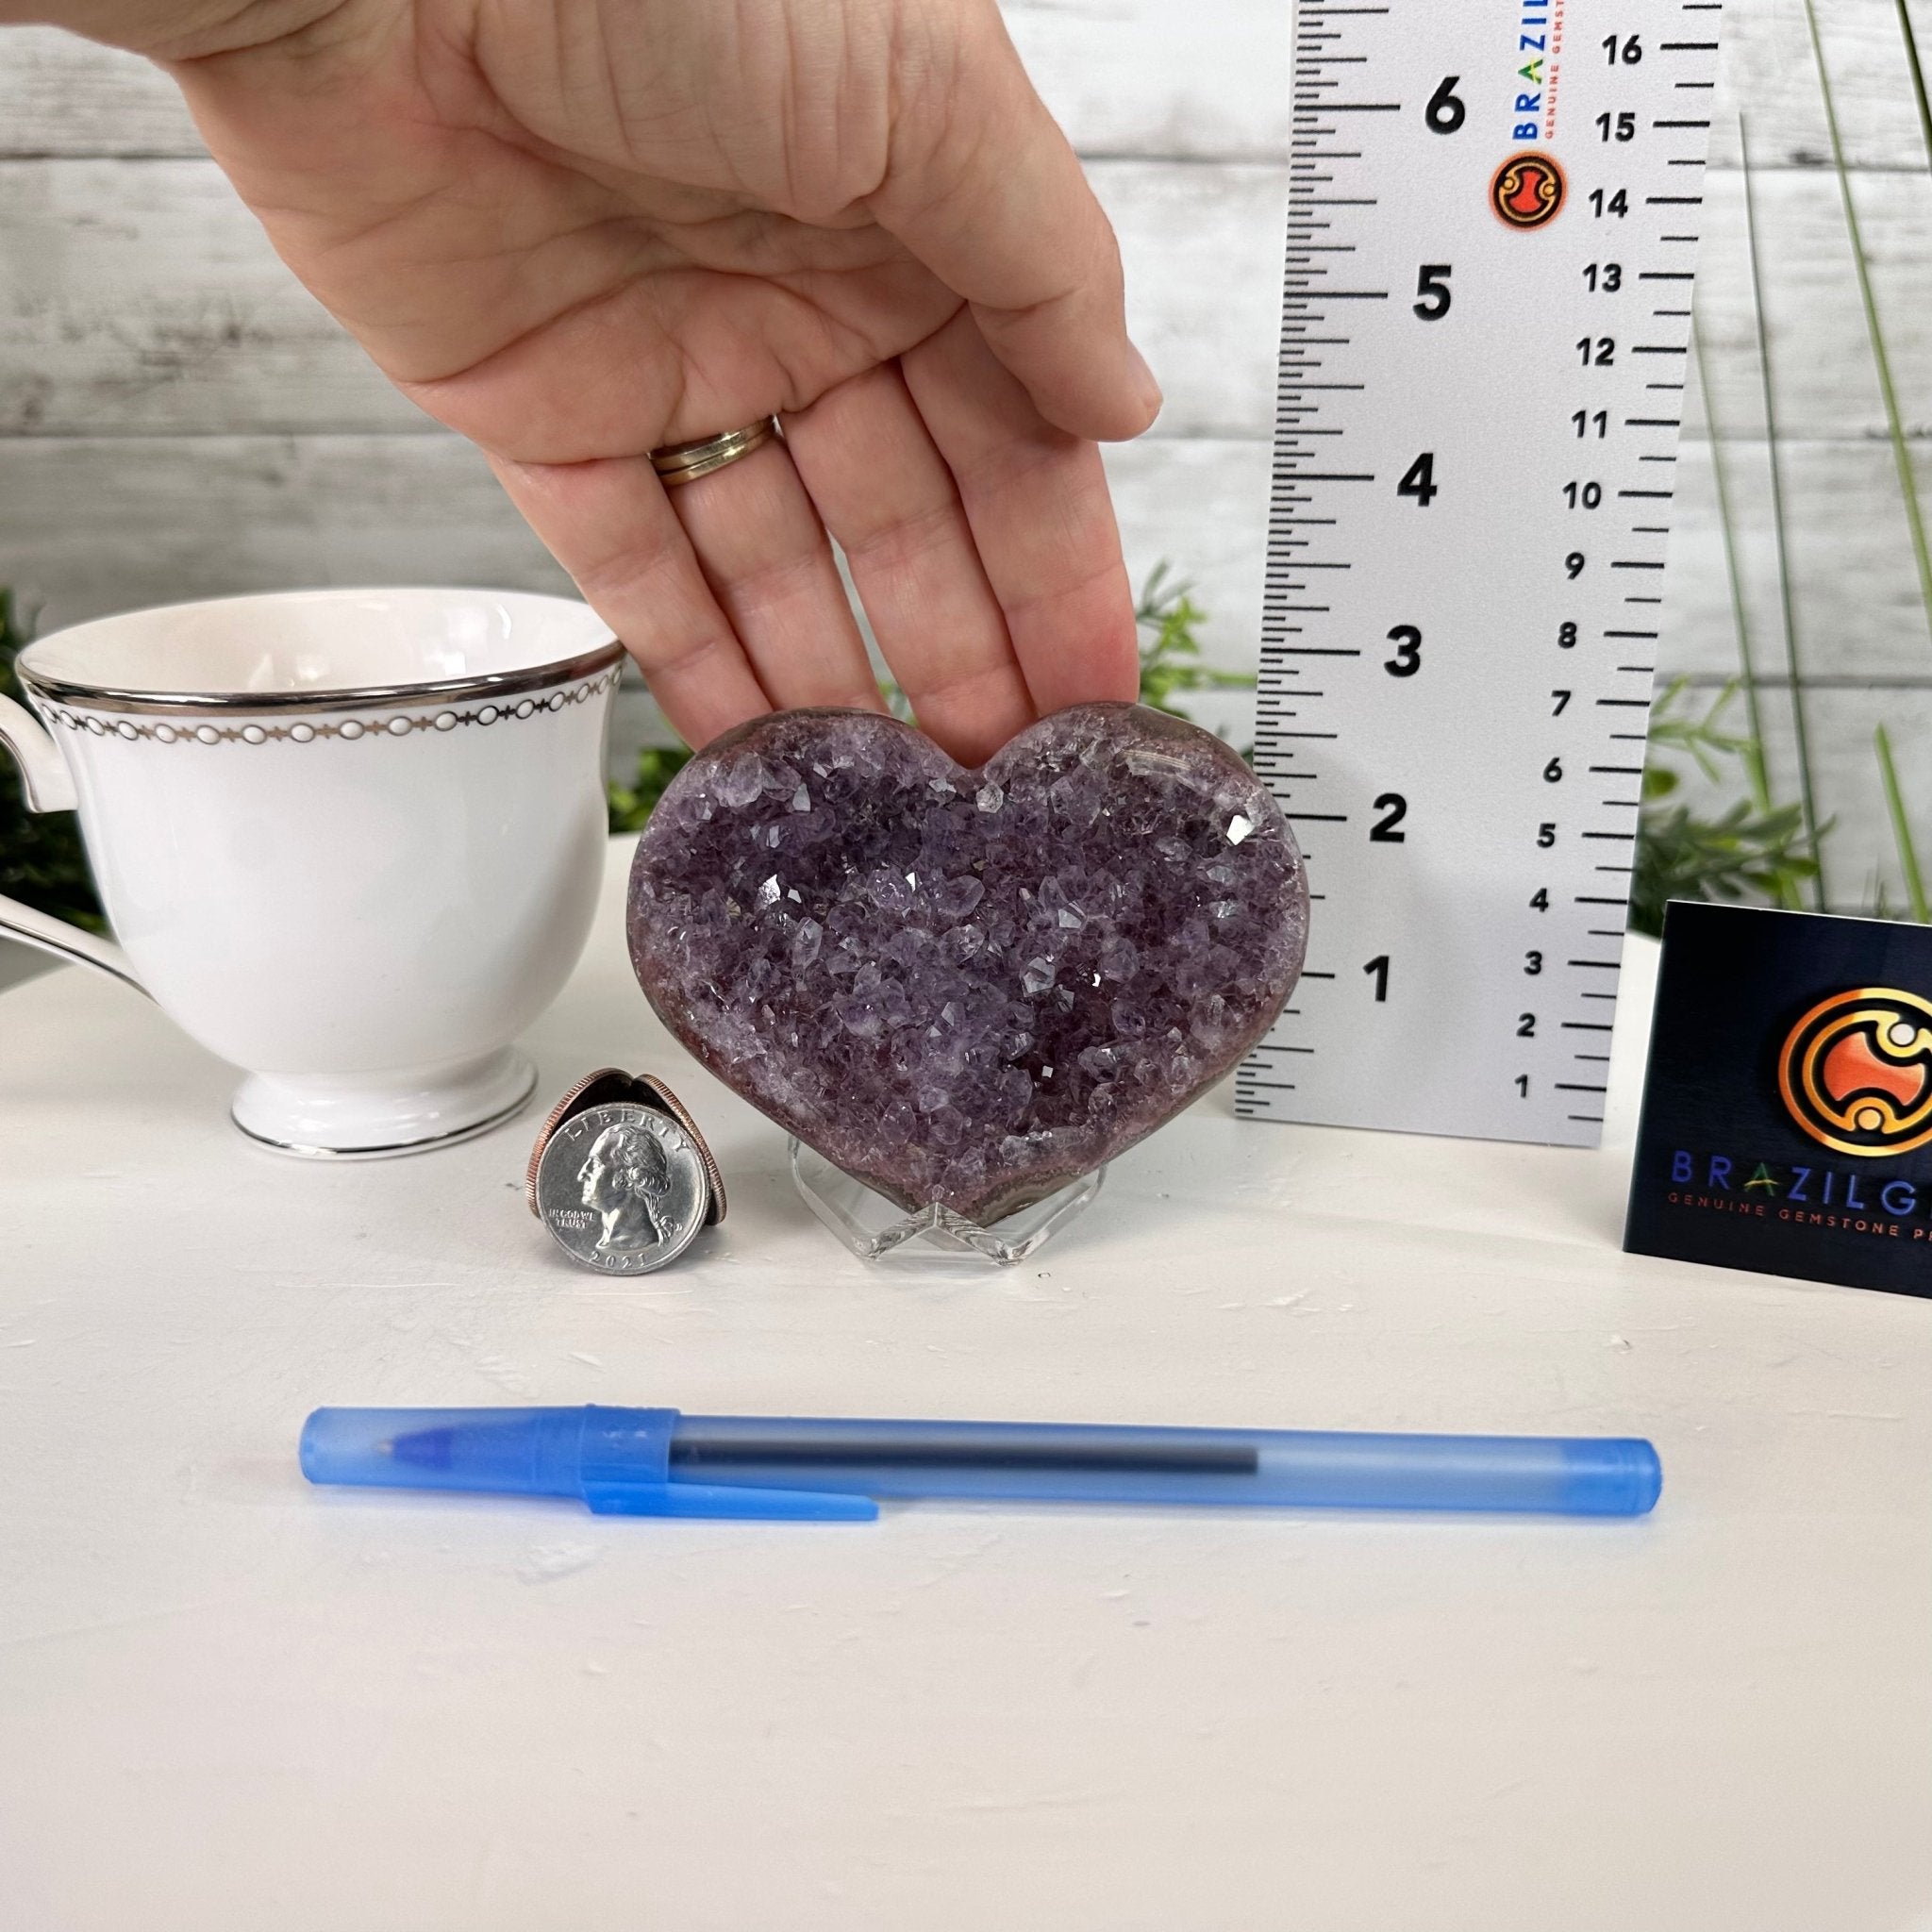 Extra Quality Amethyst Heart Geode on an Acrylic Stand 0.67 lbs & 2.7" Tall #5462-0090 by Brazil Gems - Brazil GemsBrazil GemsExtra Quality Amethyst Heart Geode on an Acrylic Stand 0.67 lbs & 2.7" Tall #5462-0090 by Brazil GemsHearts5462-0090